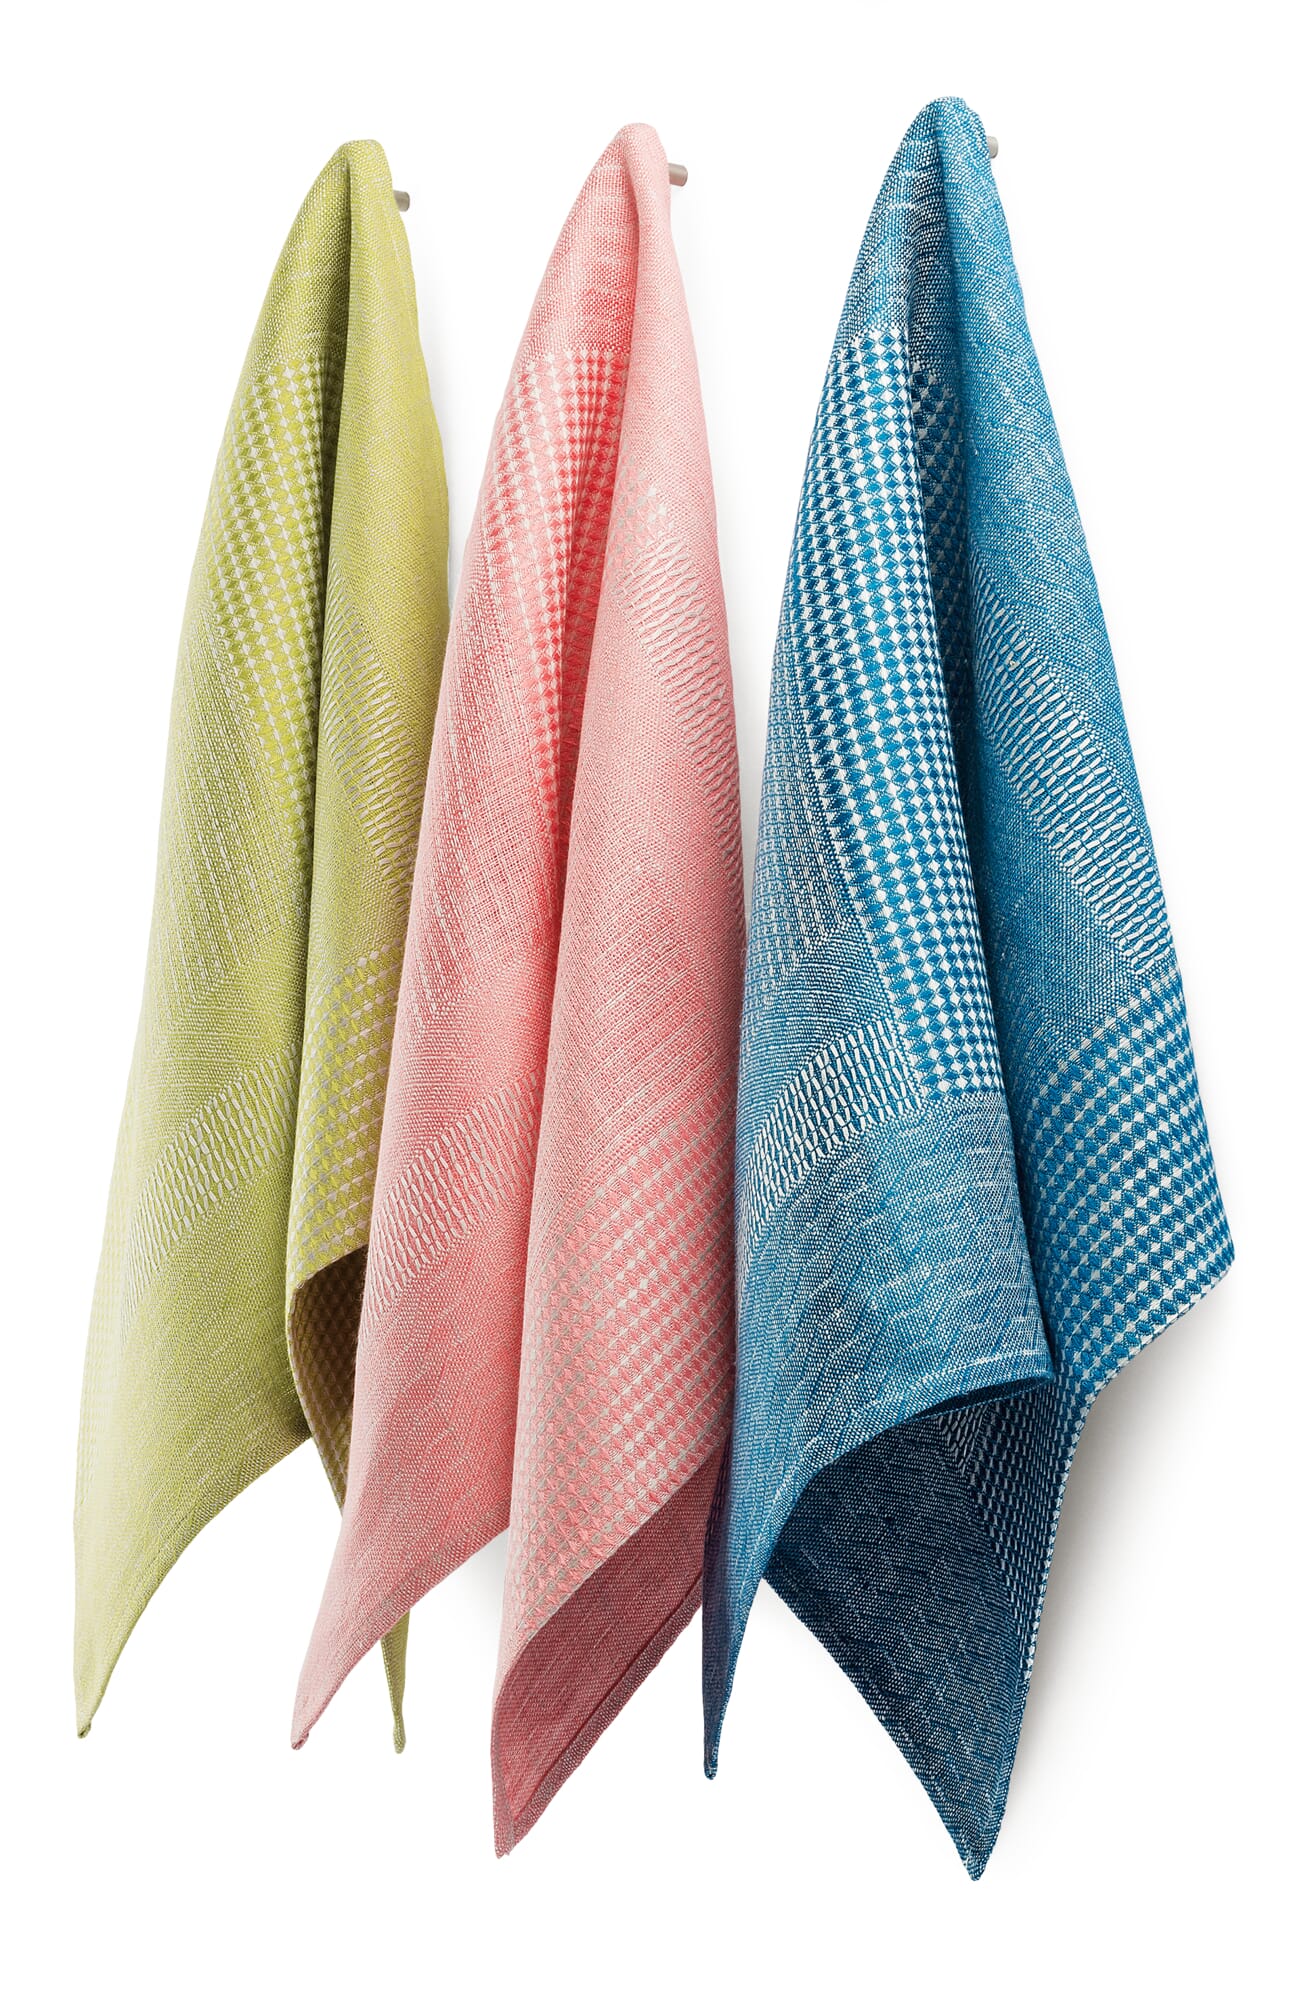 S&B Tea Towels at Design Within Reach